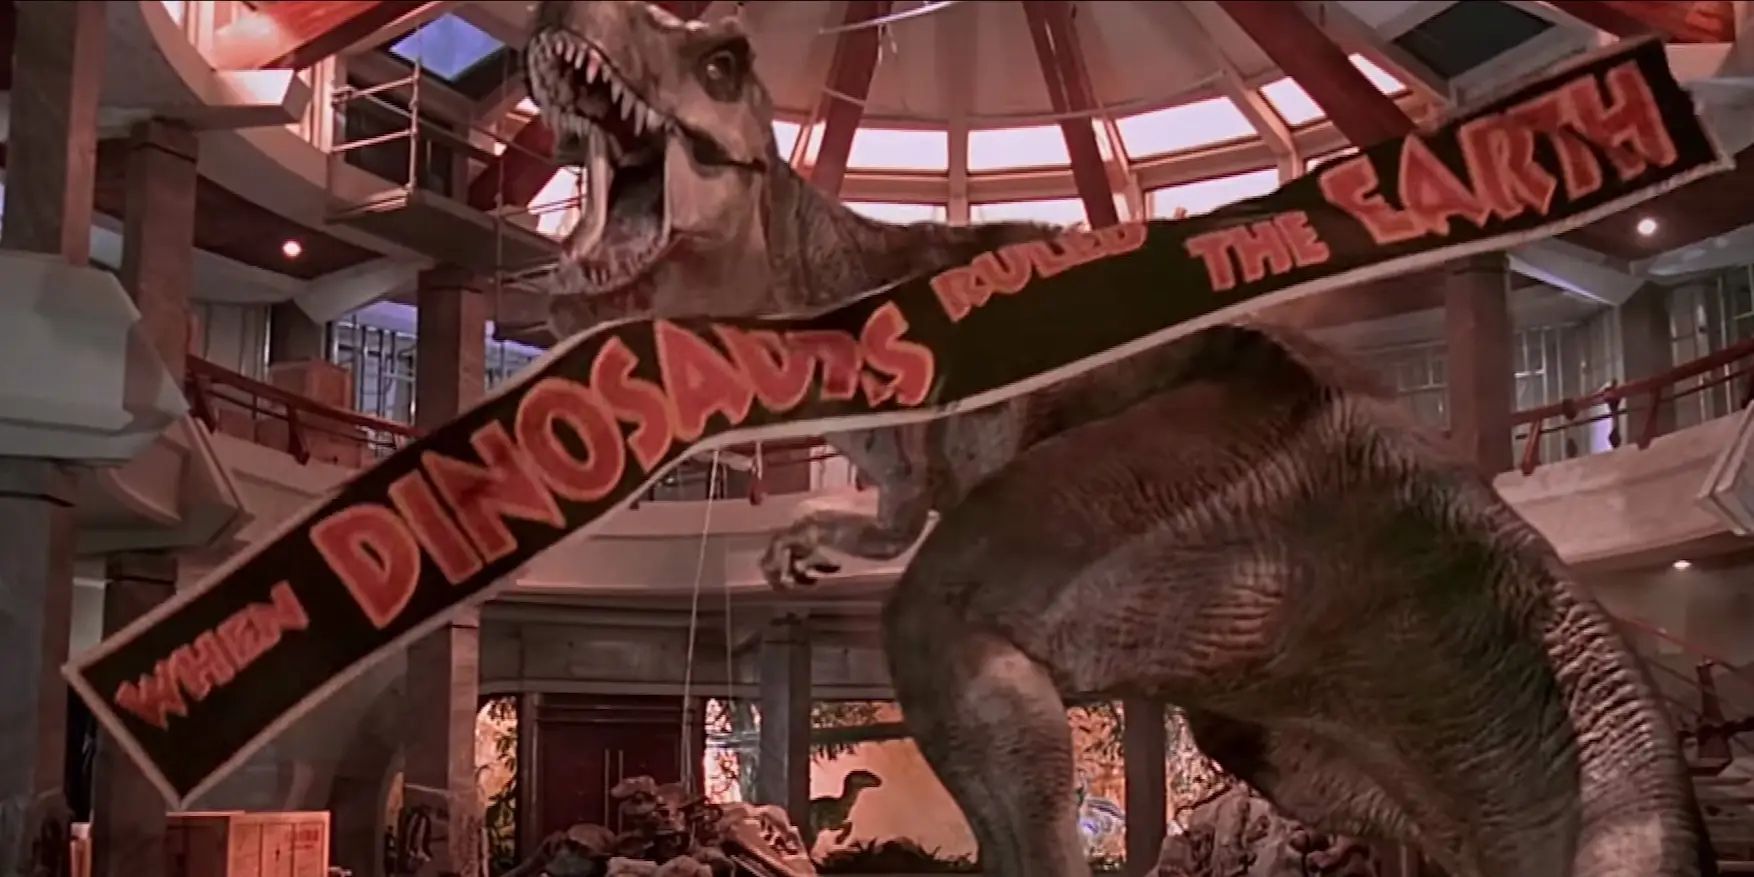 <p>If you were fortunate enough to catch <a href="https://www.imdb.com/title/tt0107290/?ref_=nv_sr_srsg_0"><em>Jurassic Park</em></a> in theatres, you probably remember cheering when the big bad T-Rex actually comes to save the day for the humans. She <a href="https://www.youtube.com/watch?v=gTWo9oLJOWk&list=PLZbXA4lyCtqrd-fXvh6kIIEpRDBLEnJs9&index=10">makes short work of the raptors </a>that cornered the group, and gives a triumphant roar as a banner with the words “When Dinosaurs Ruled The Earth” falls in front of her. </p>